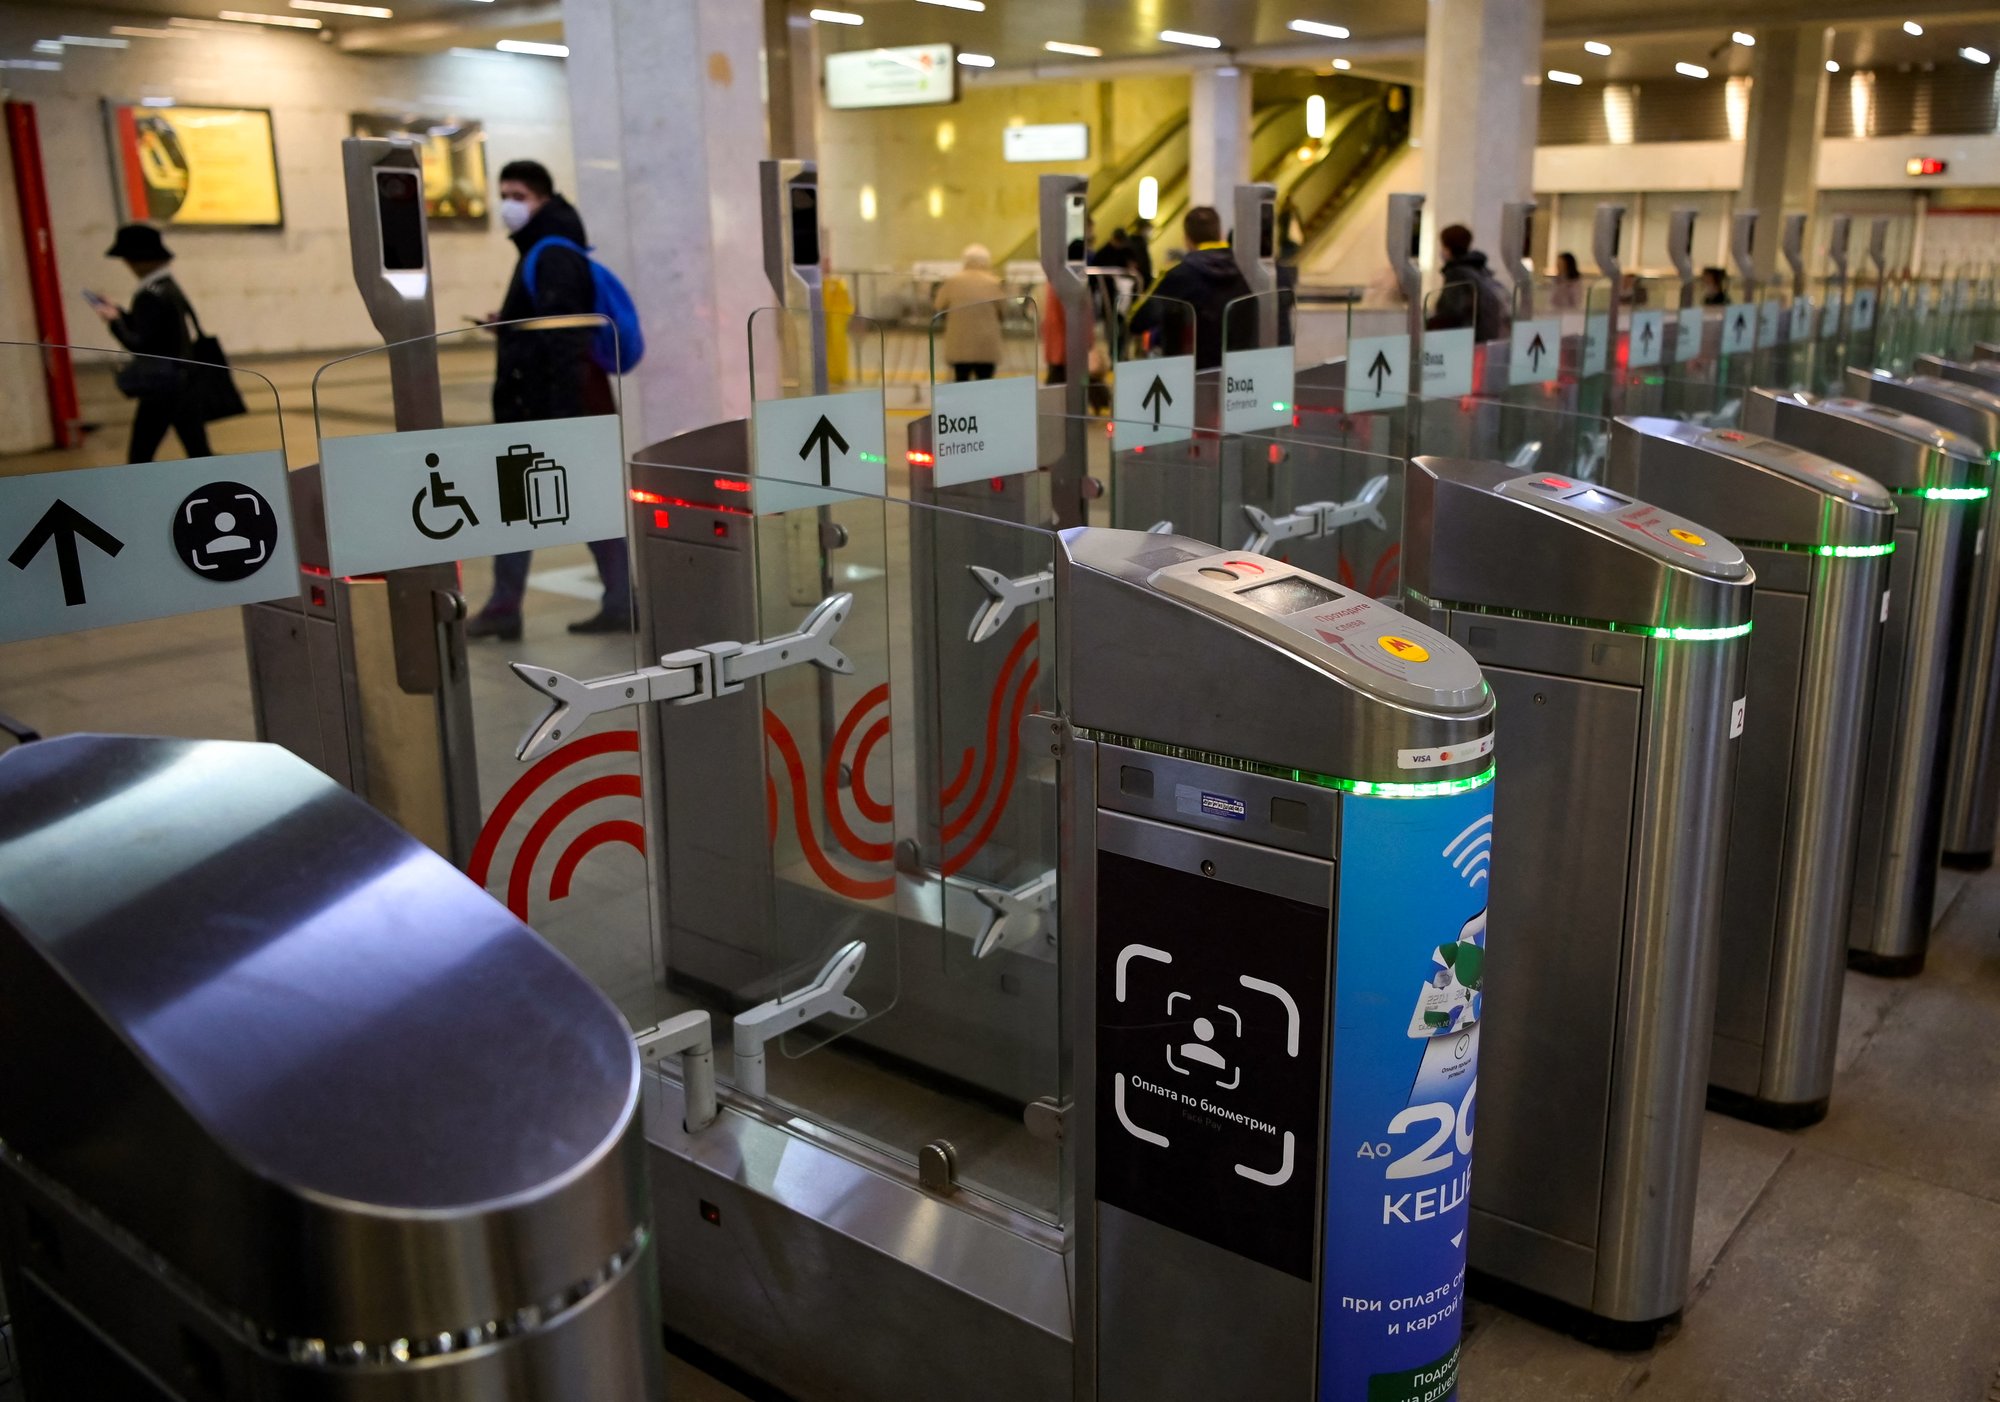 A face recognition access control system has been installed at Moscow metro stations